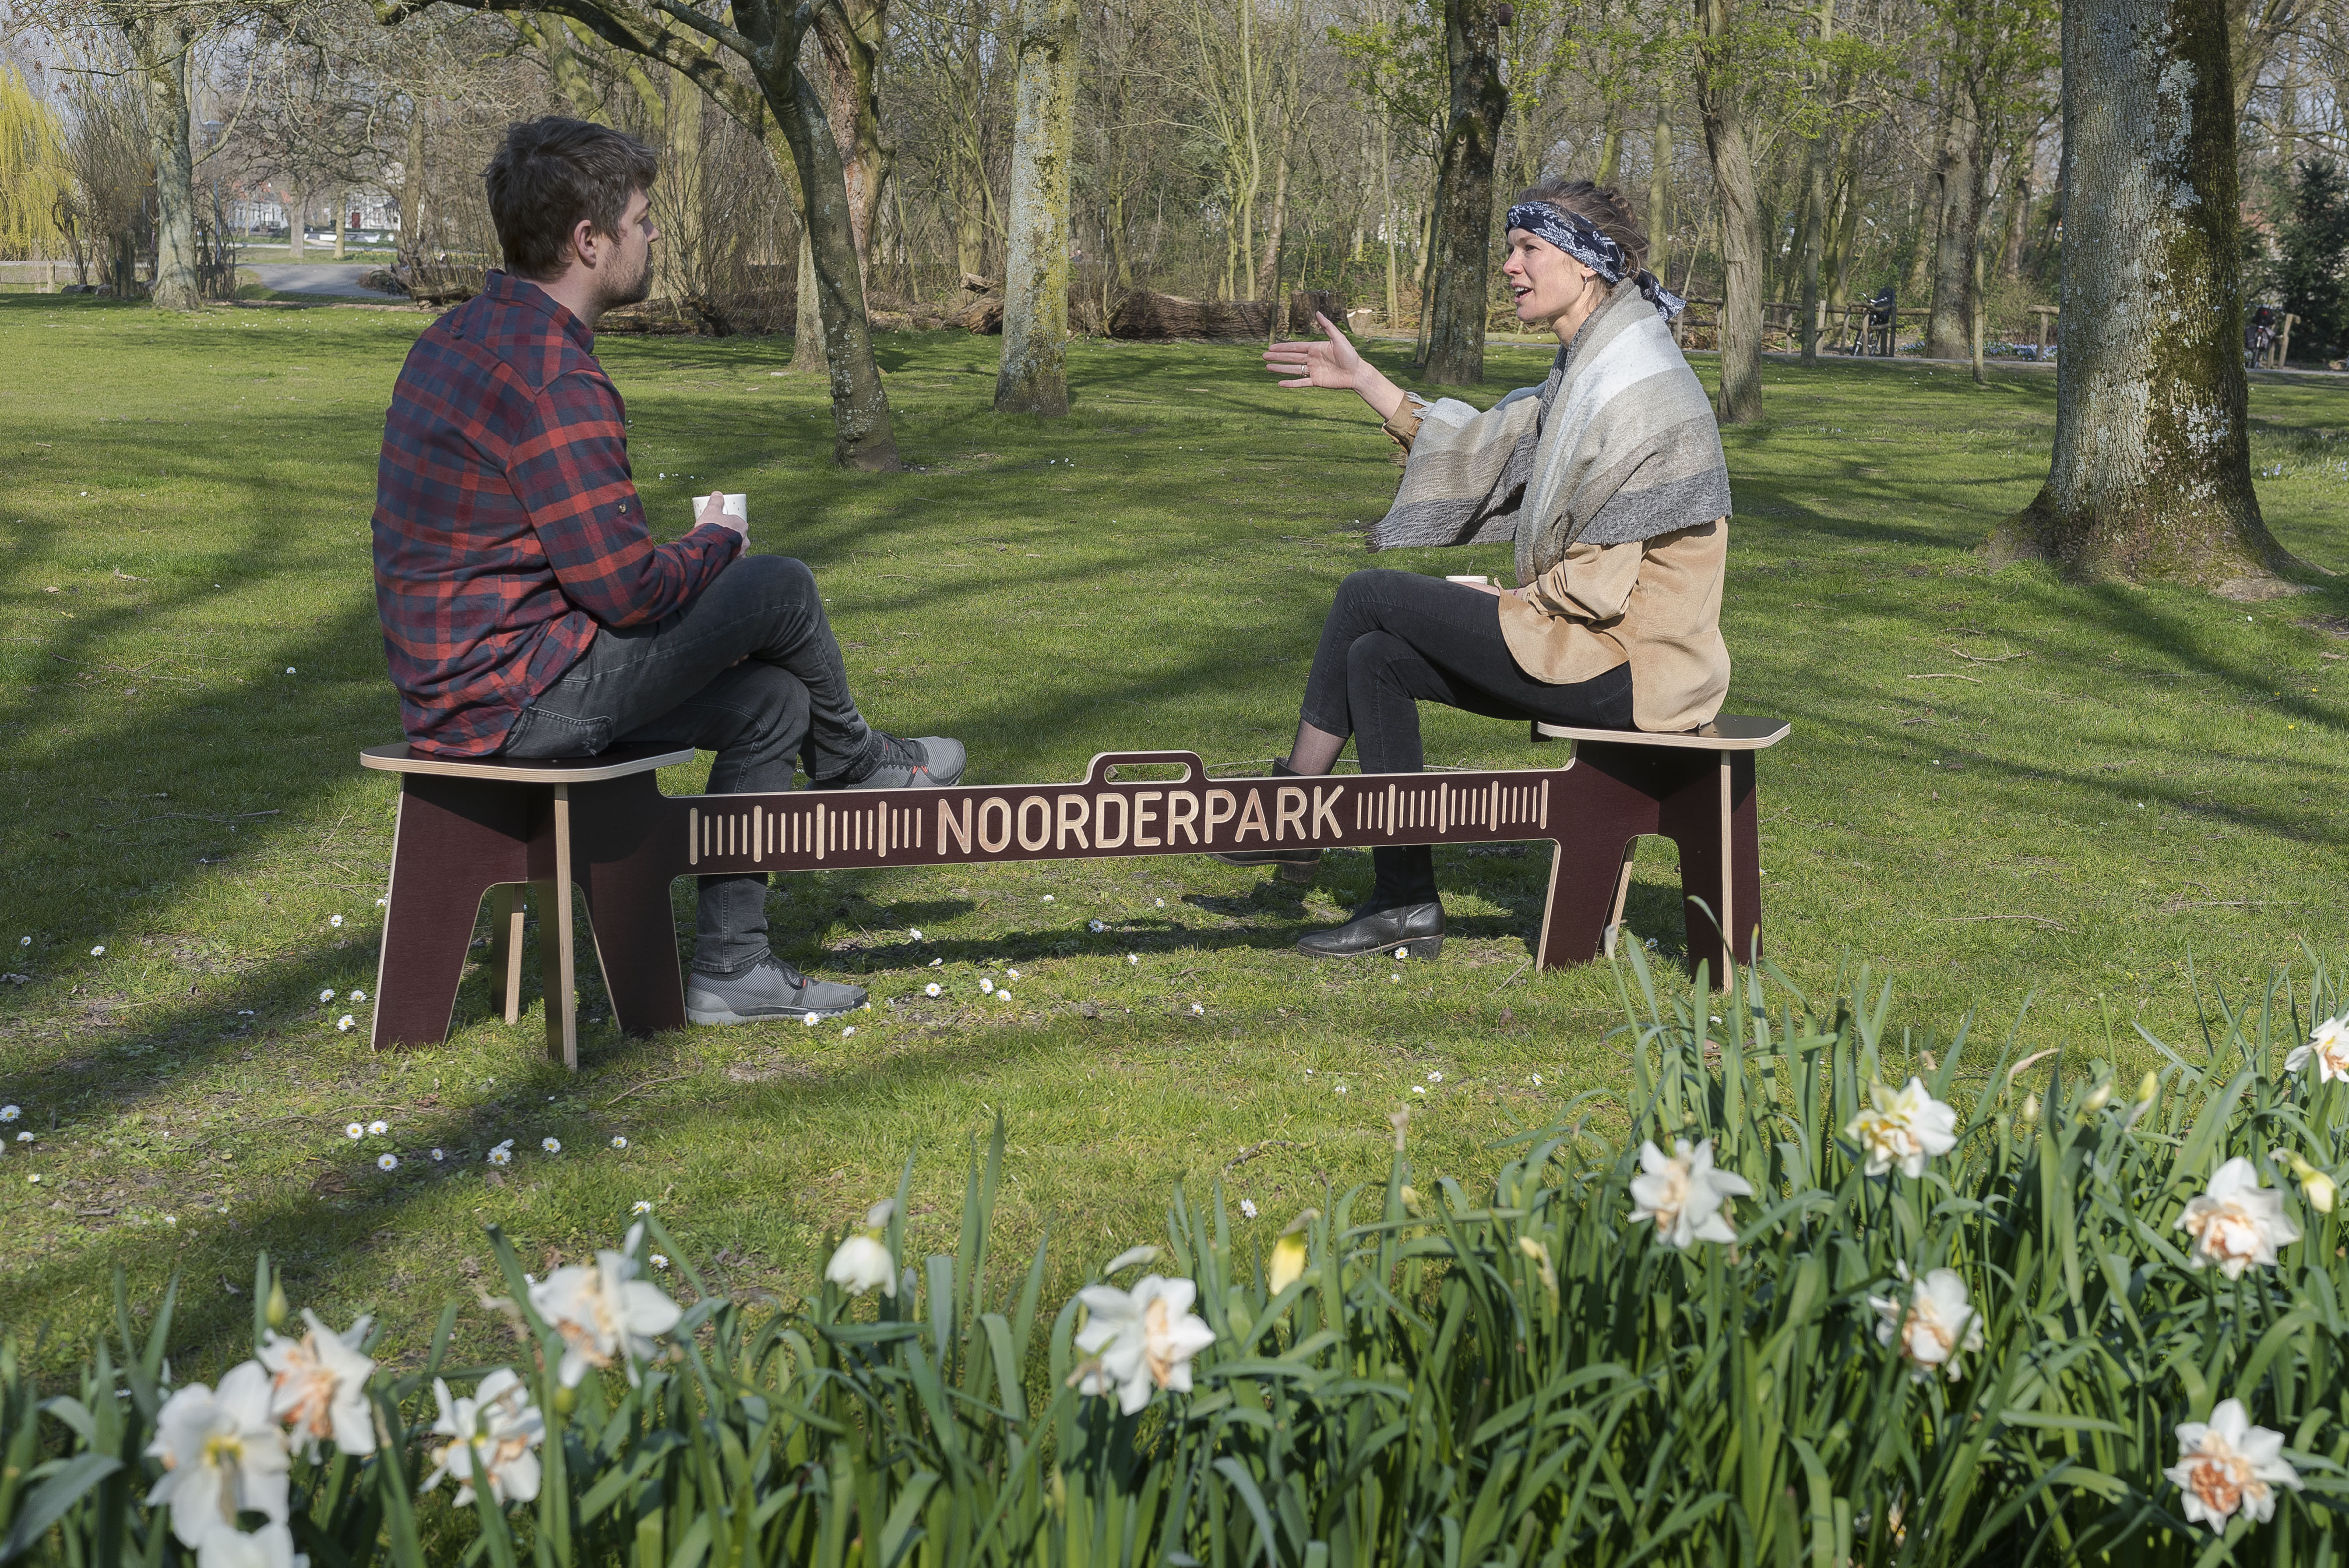 ‘CoronaCrisisKruk’ Social Distancing Bench, designed by Björn van den Broek, Object Studio in 2020 and manufactured in Amsterdam, 2021. K.2021.8. The ‘CoronaCrisisKruk’ is a portable bench designed for social distancing, originally created in 2020 for the Noorderpark in the Amsterdam-Noord district of the Dutch capital. The bench is comprised of two stools or ‘krukken’, connected by a 1.5m beam in line with Dutch government social distancing regulations at the time.